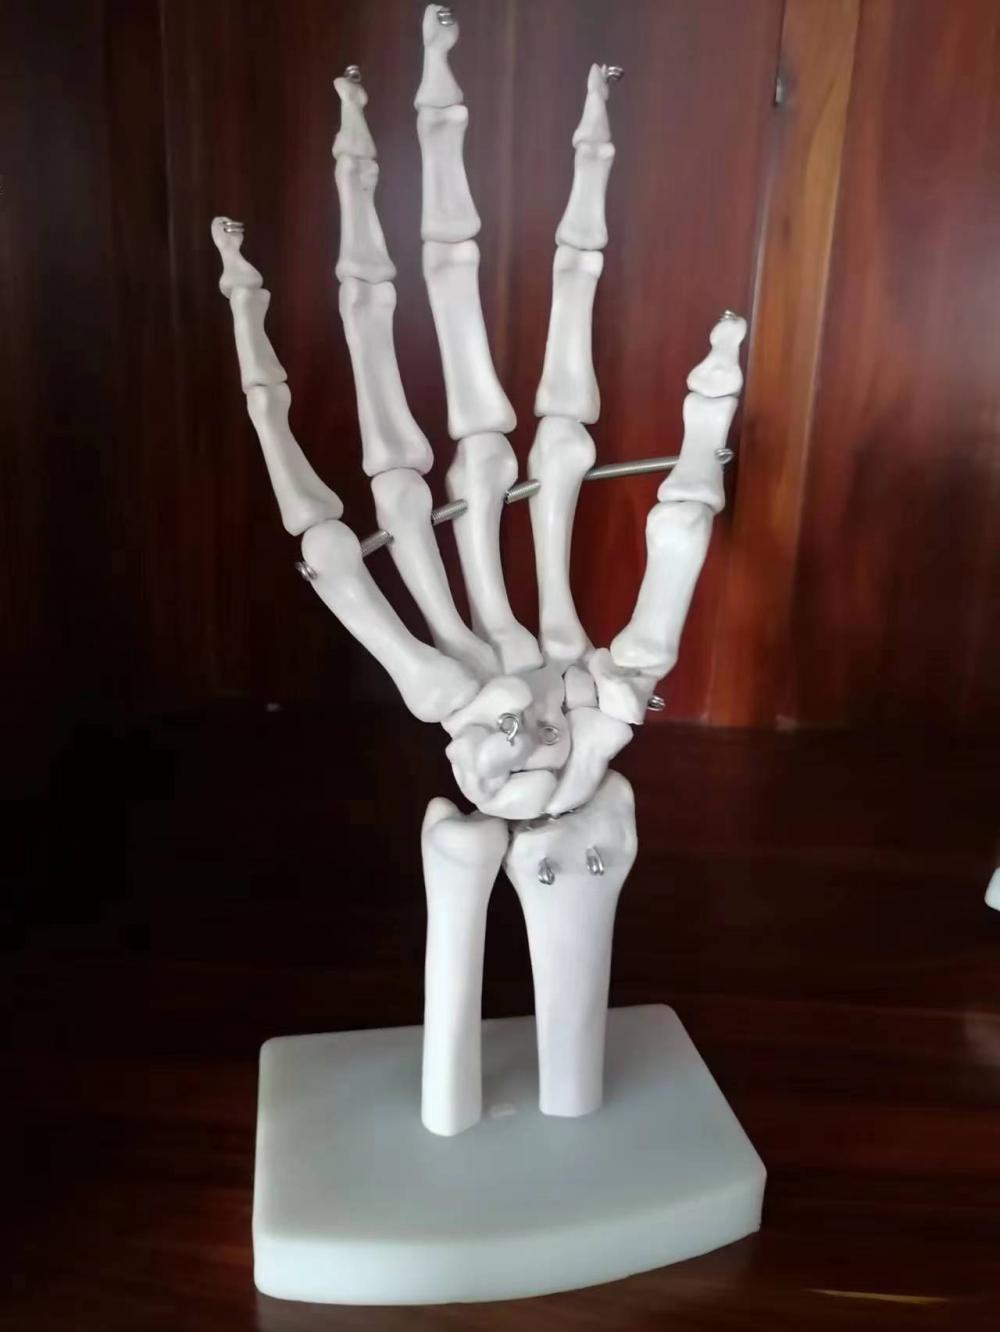 Life-size Hand Joint with Ligaments